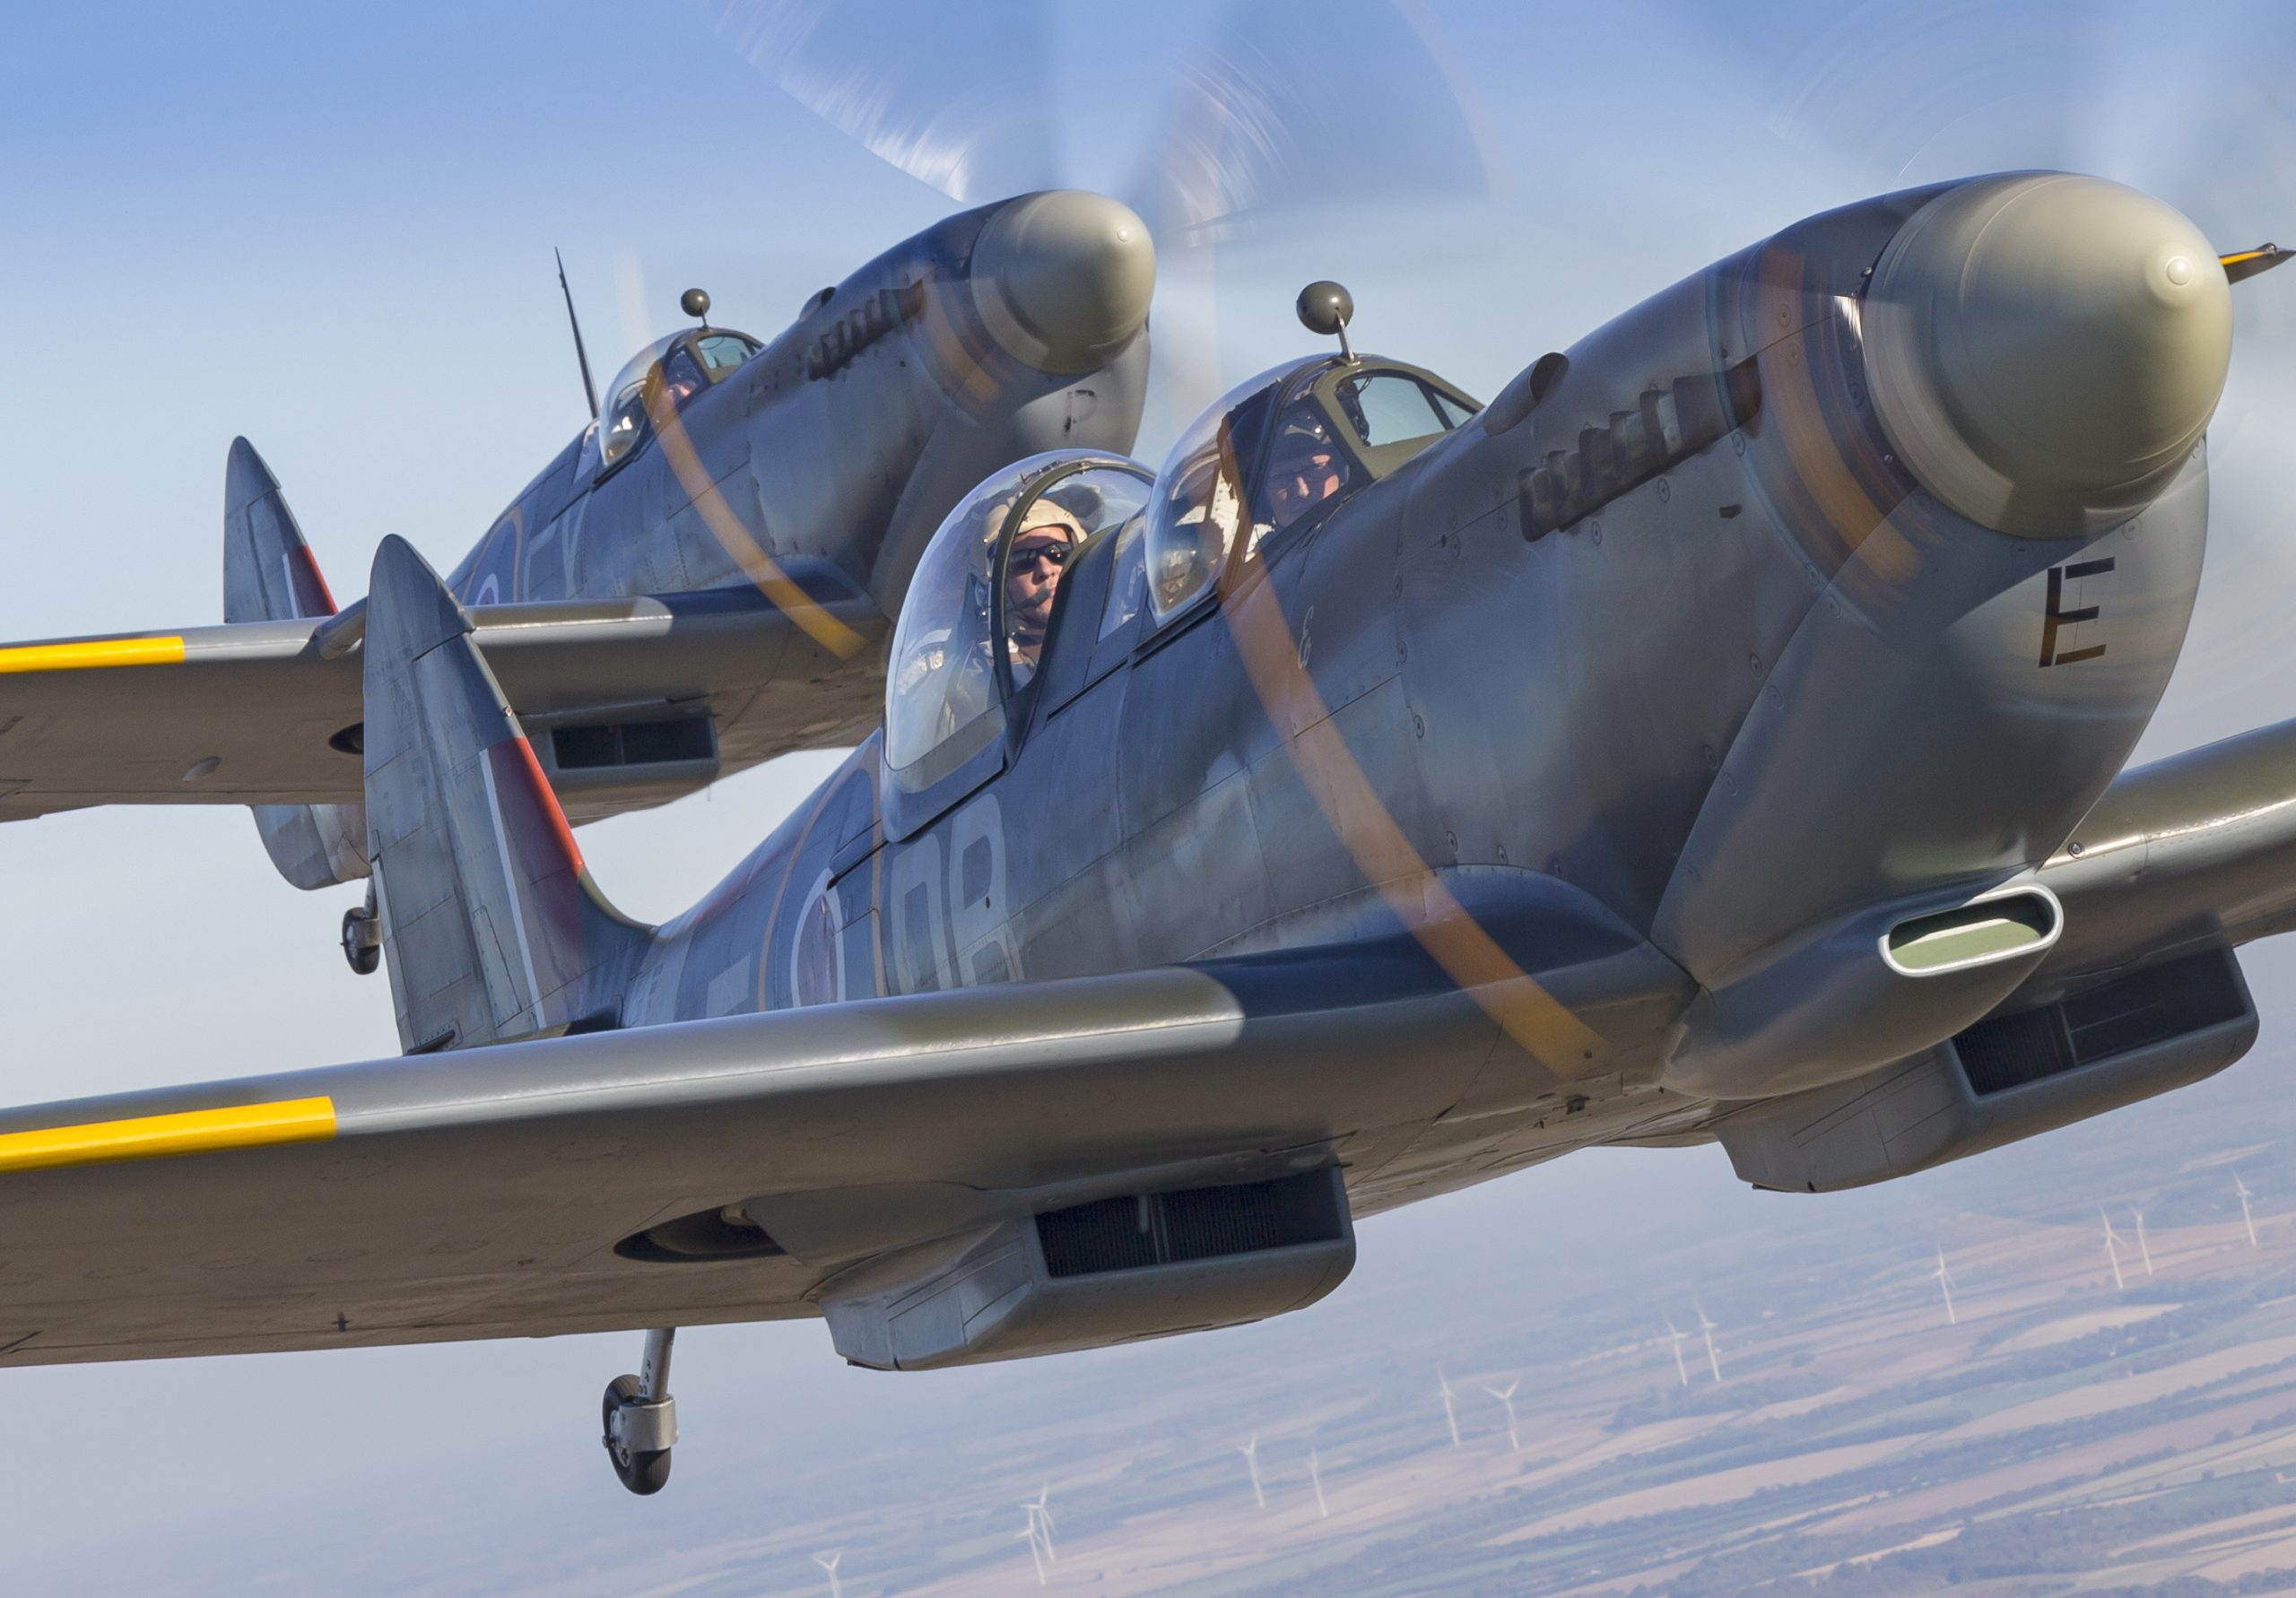 Fly in a Spitfire Formation Voucher